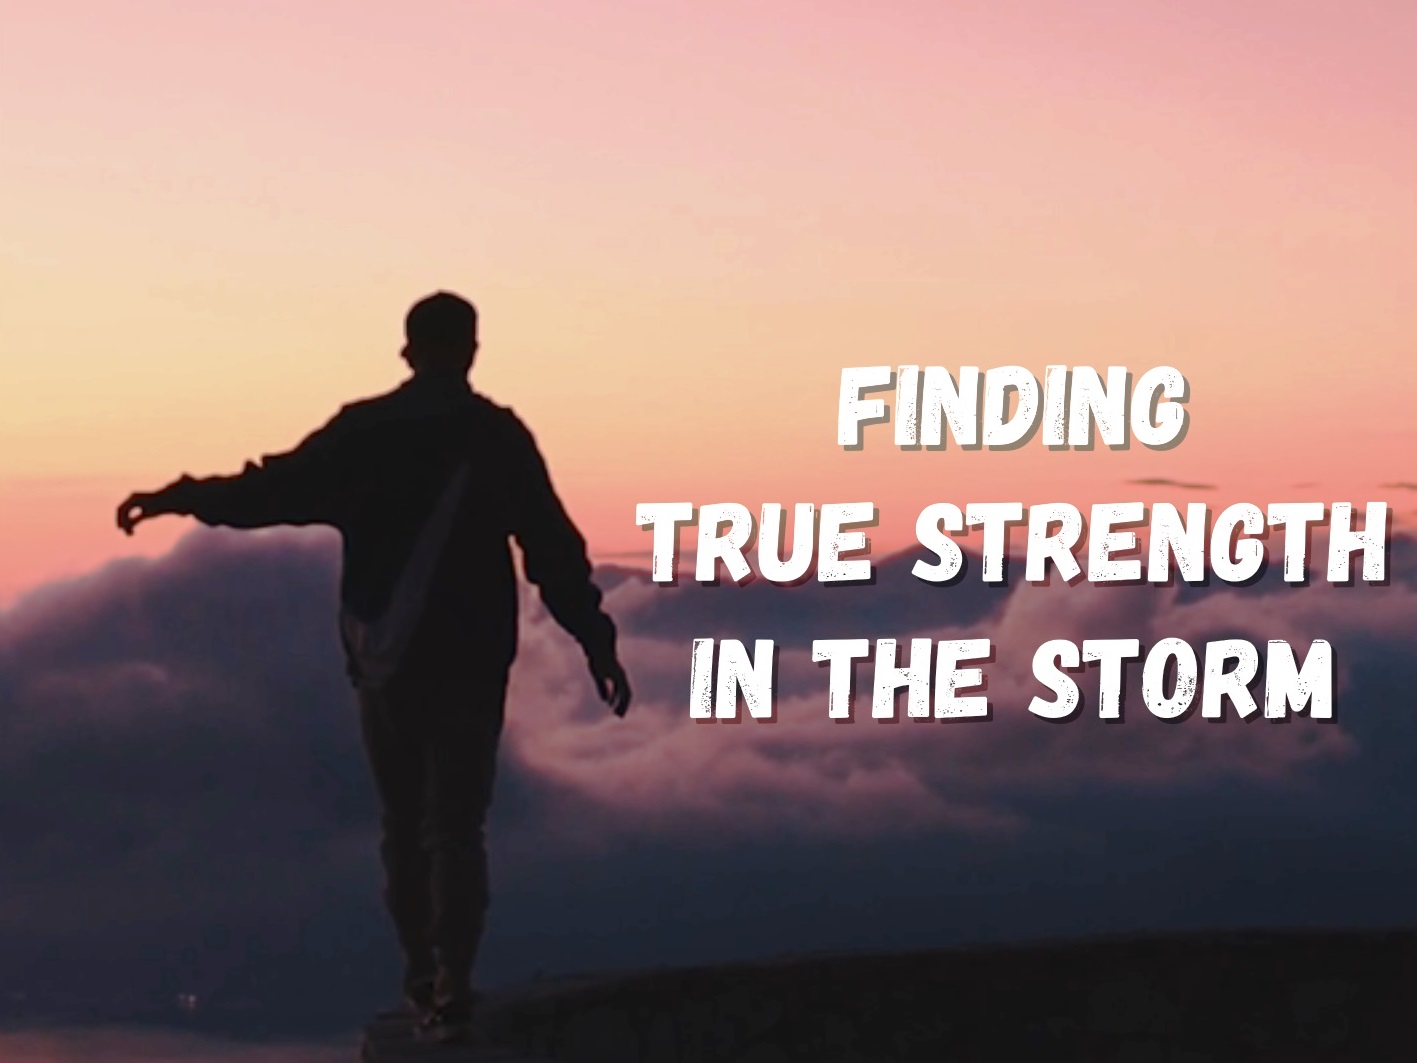 Finding True Strength in the Storm